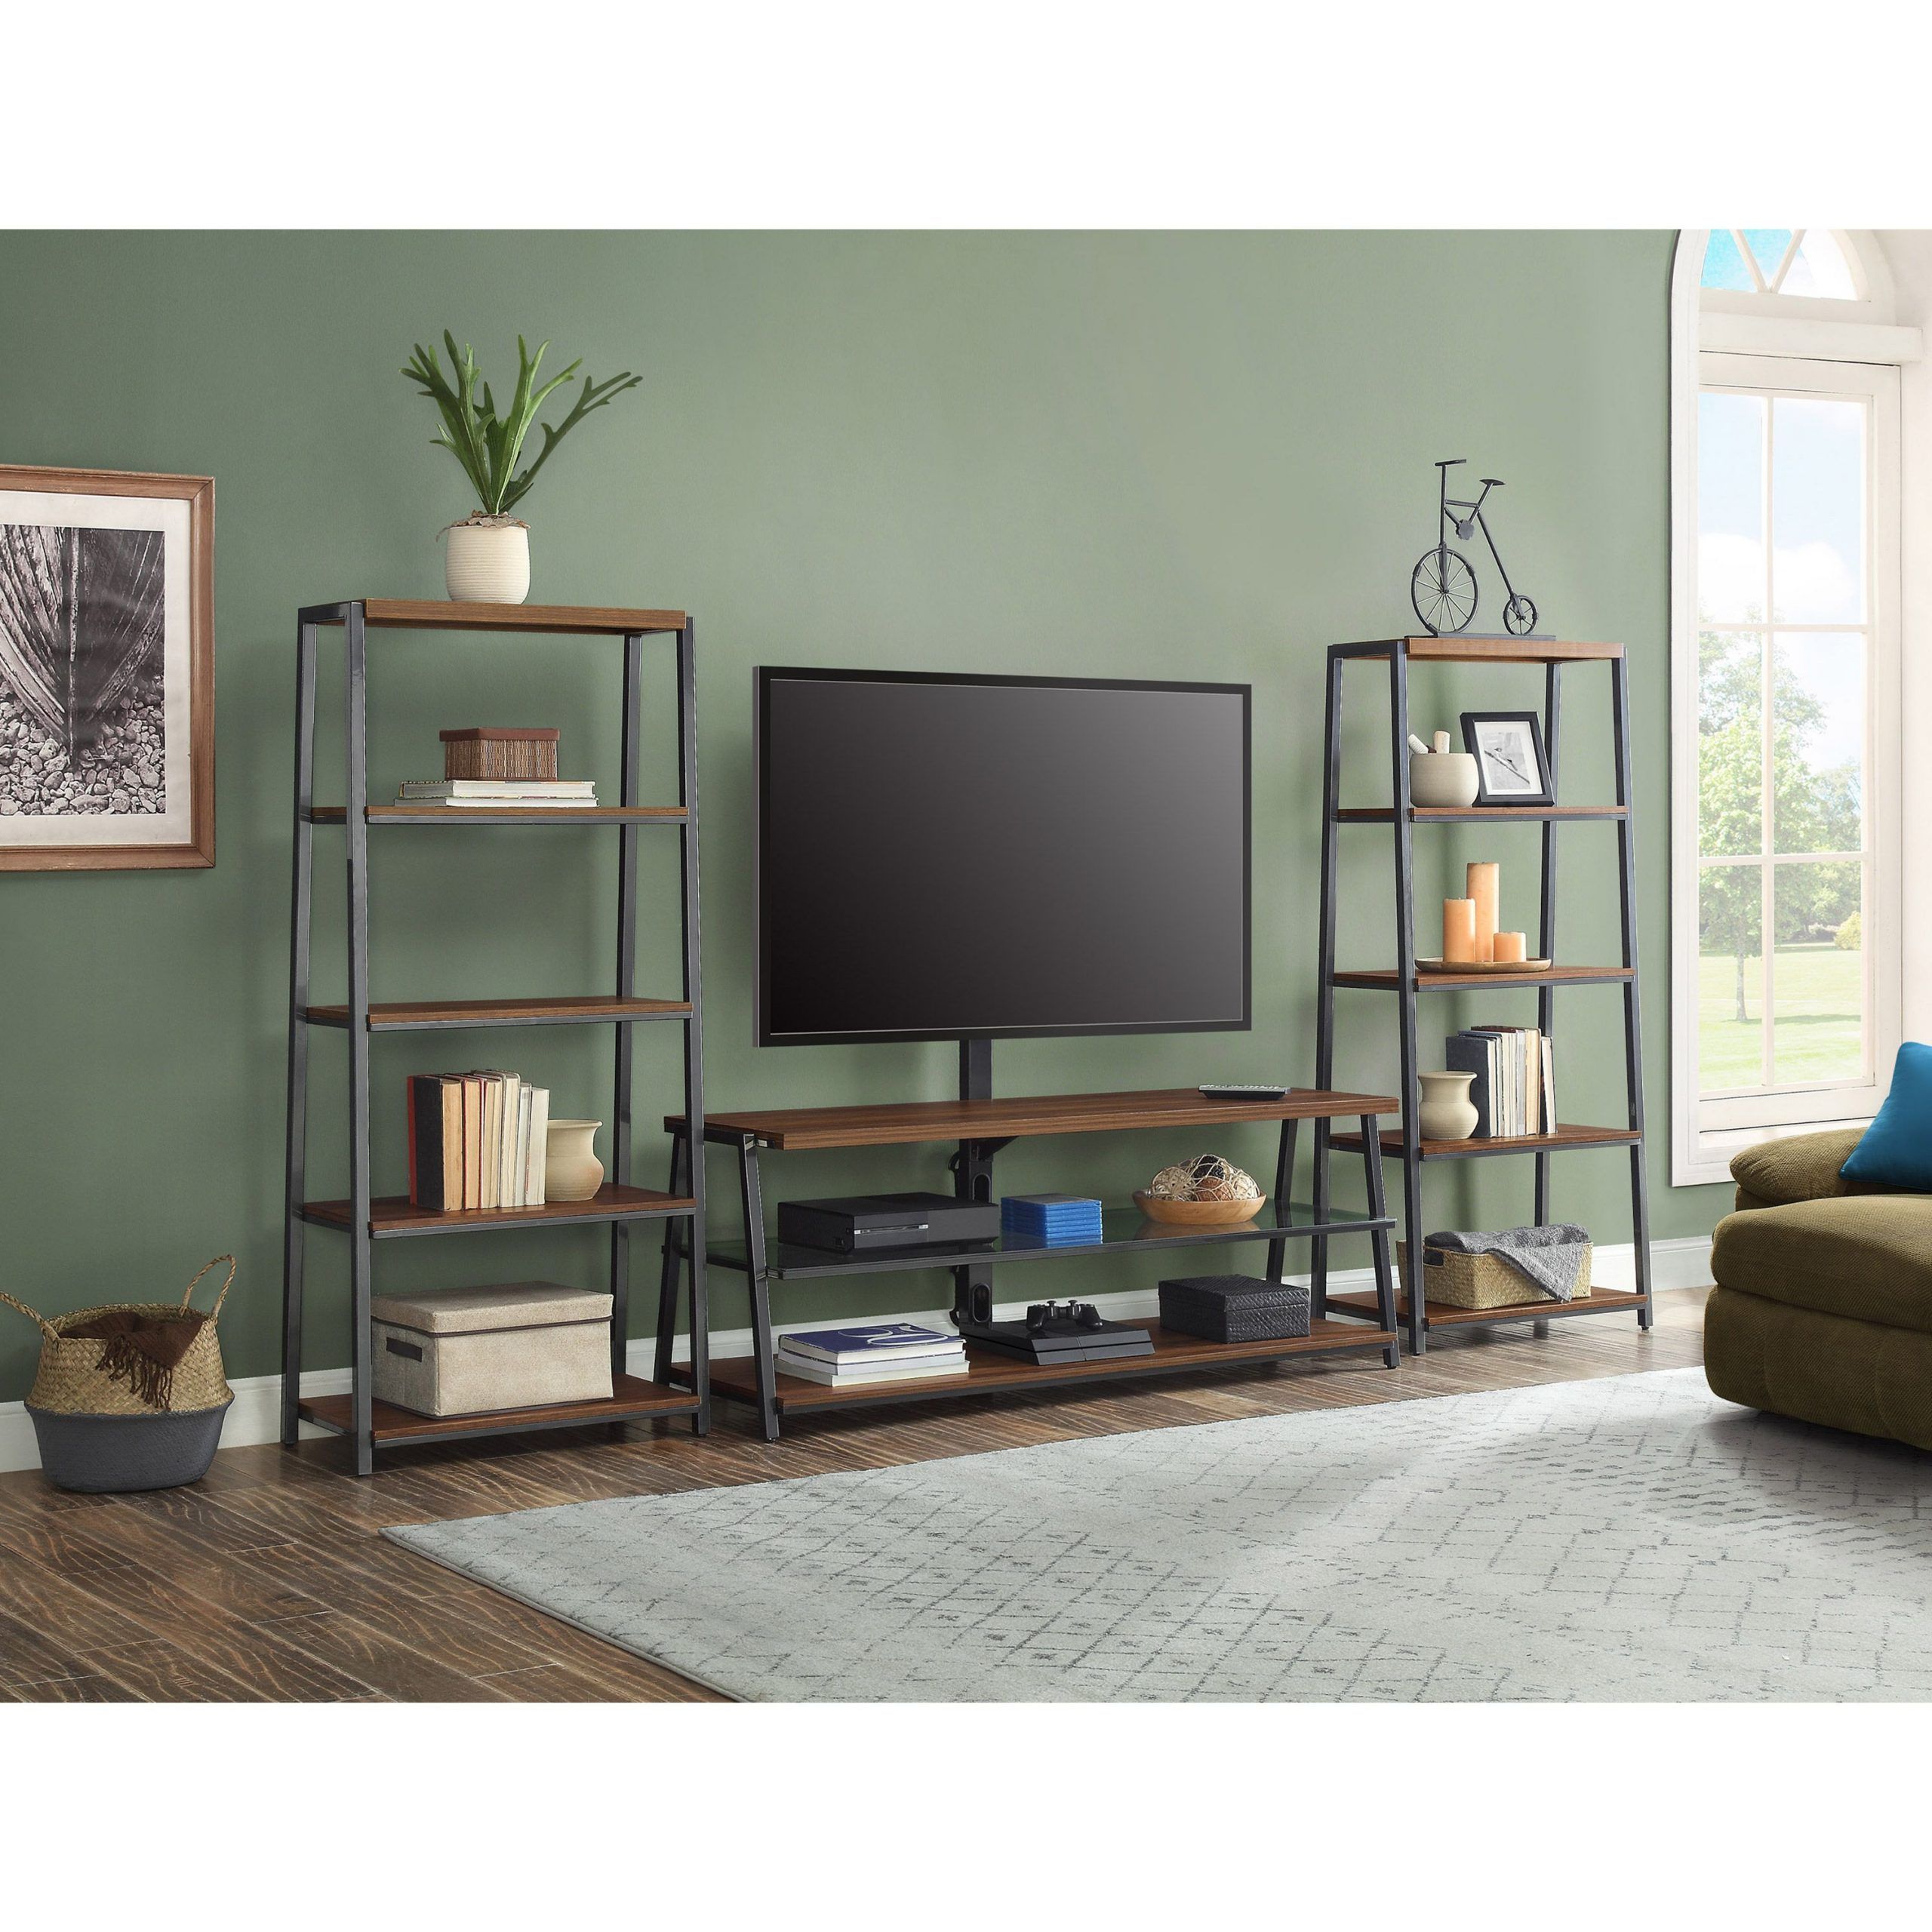 Buy Mainstays Arris 3 In 1 Tv Stand Tv Stand And (2) 4 For Mainstays Arris 3 In 1 Tv Stands In Canyon Walnut Finish (View 13 of 15)